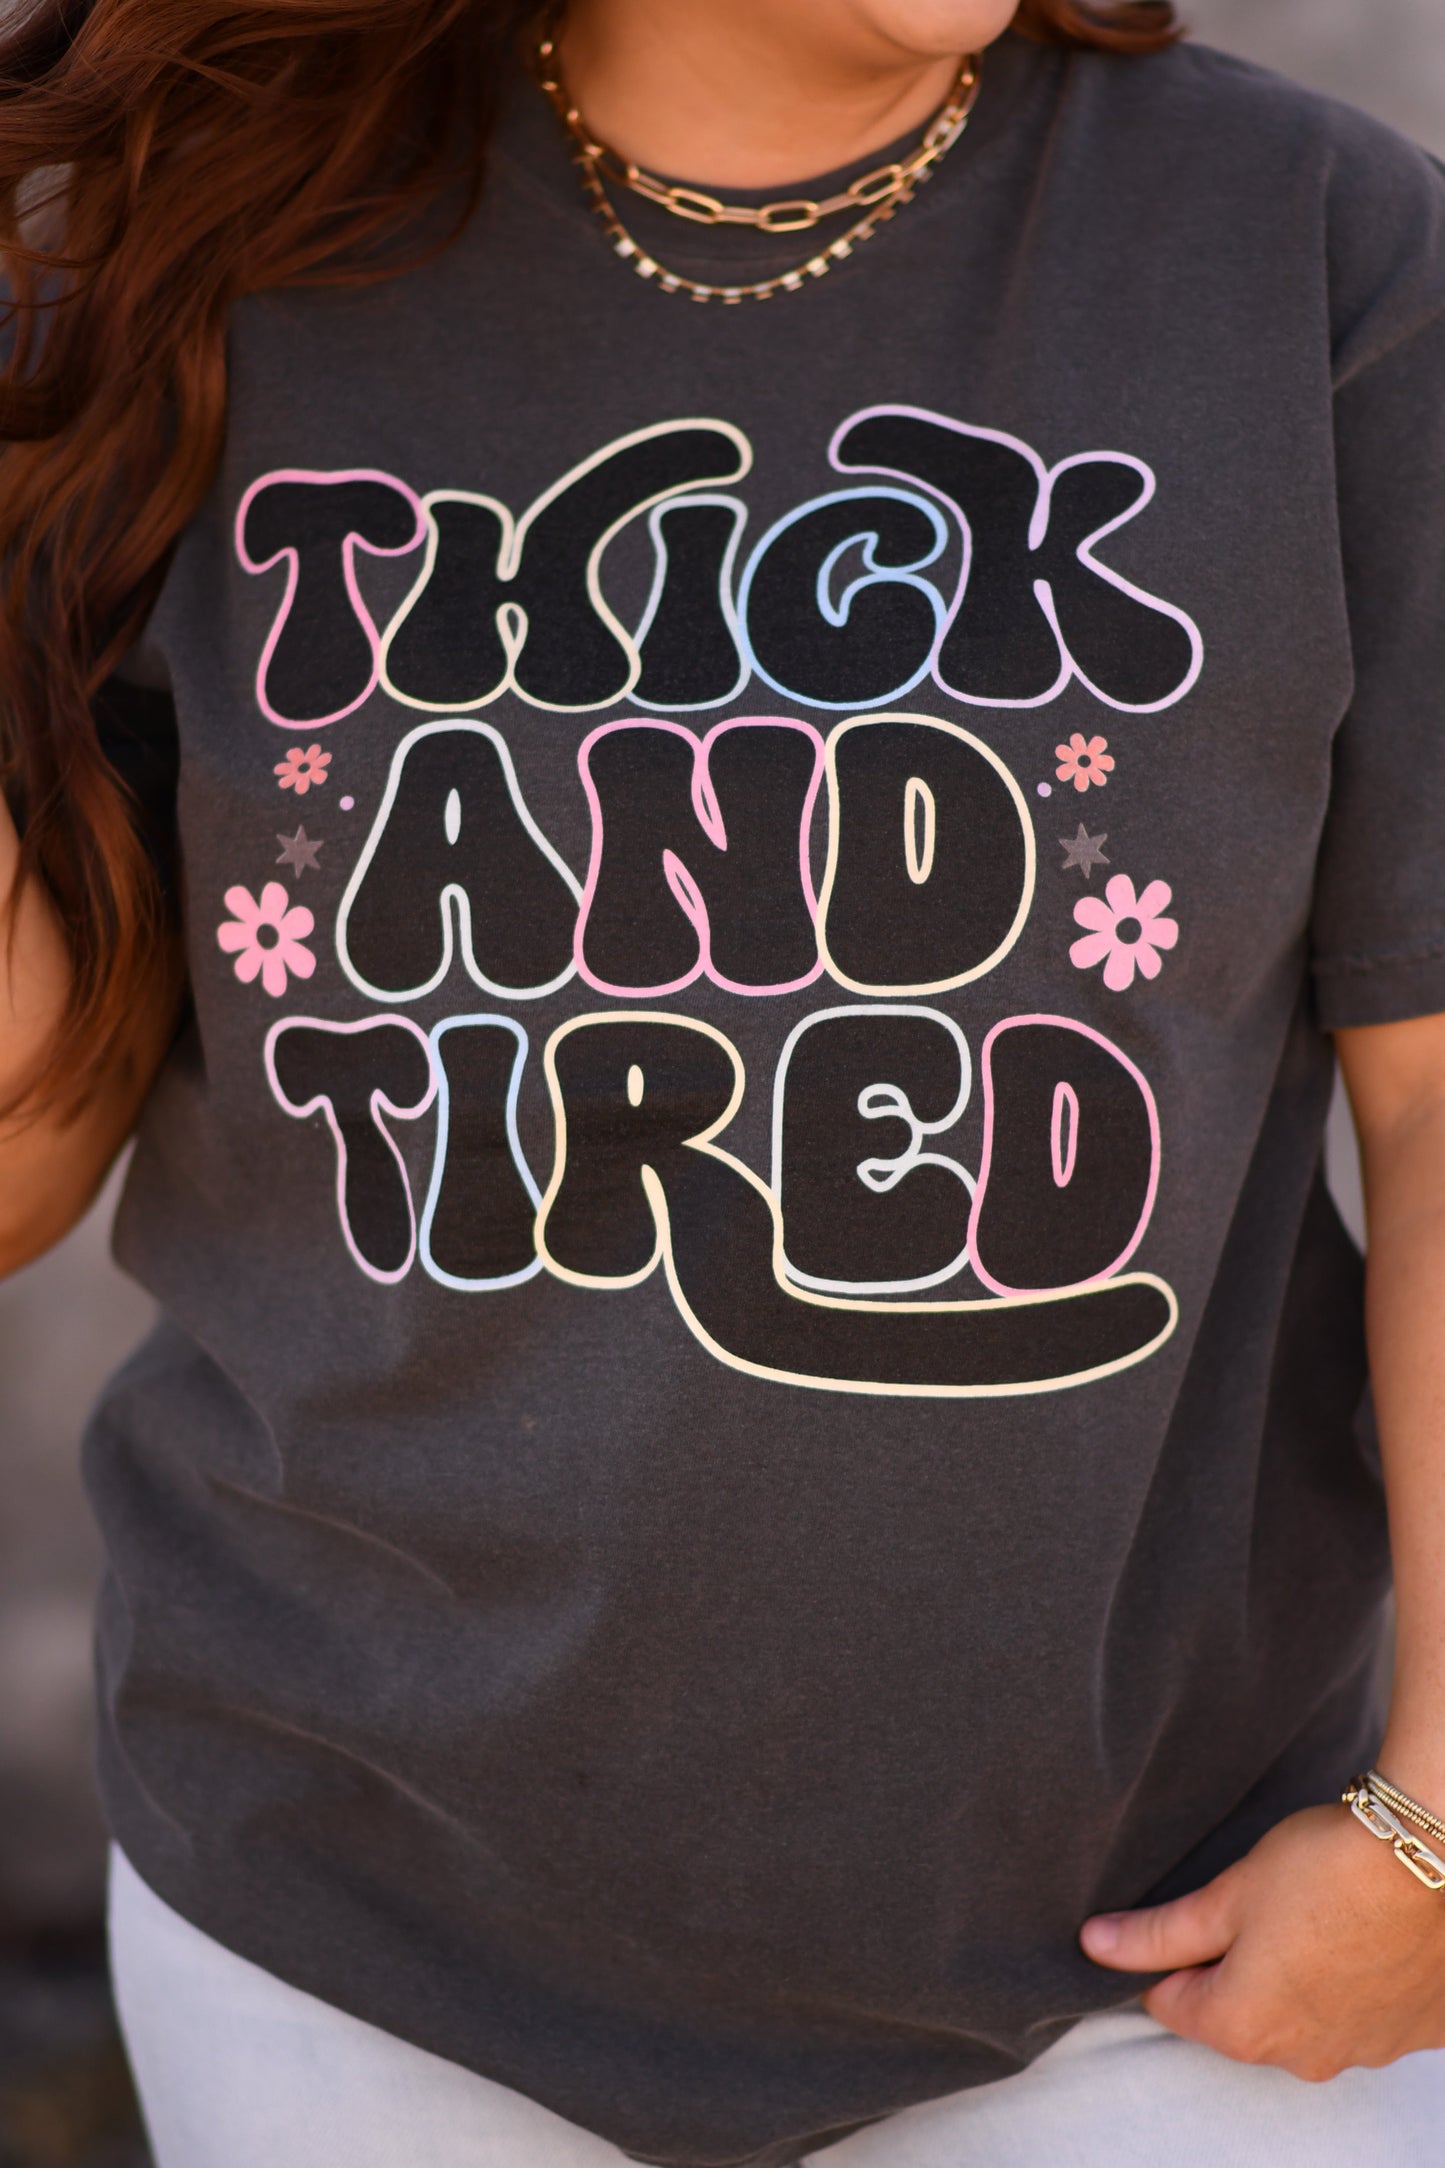 Thick and tired tee